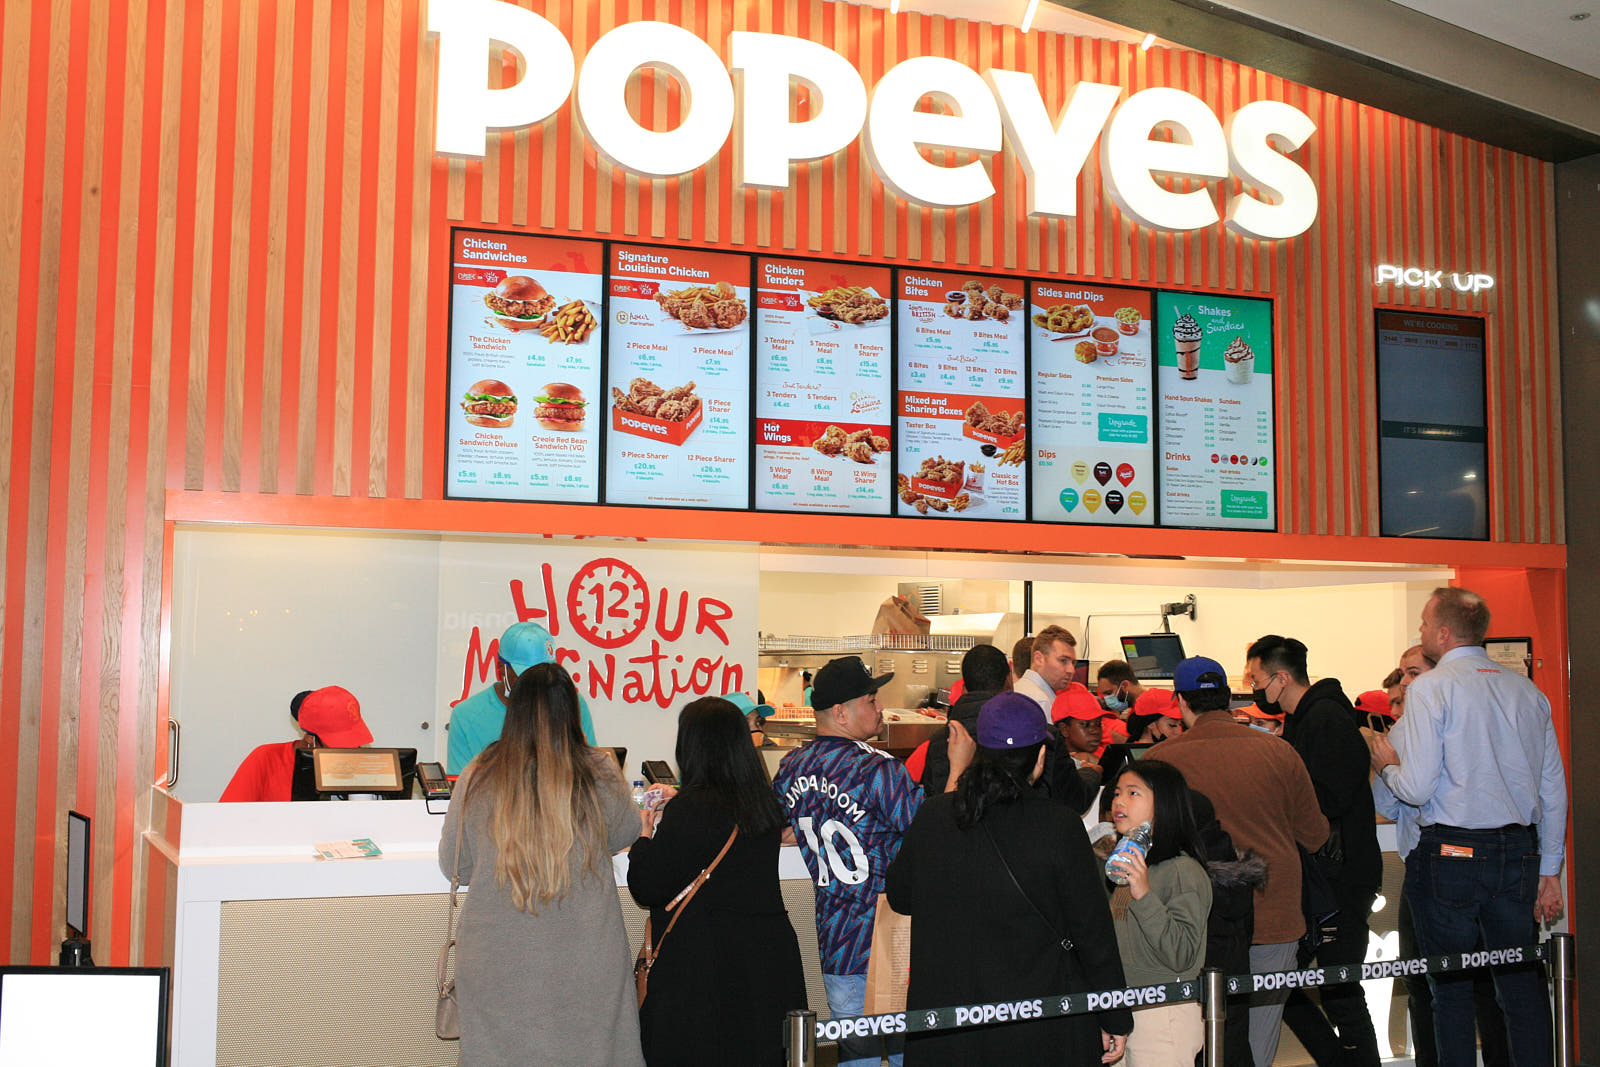 The service counter at Popeyes’ new London restaurant